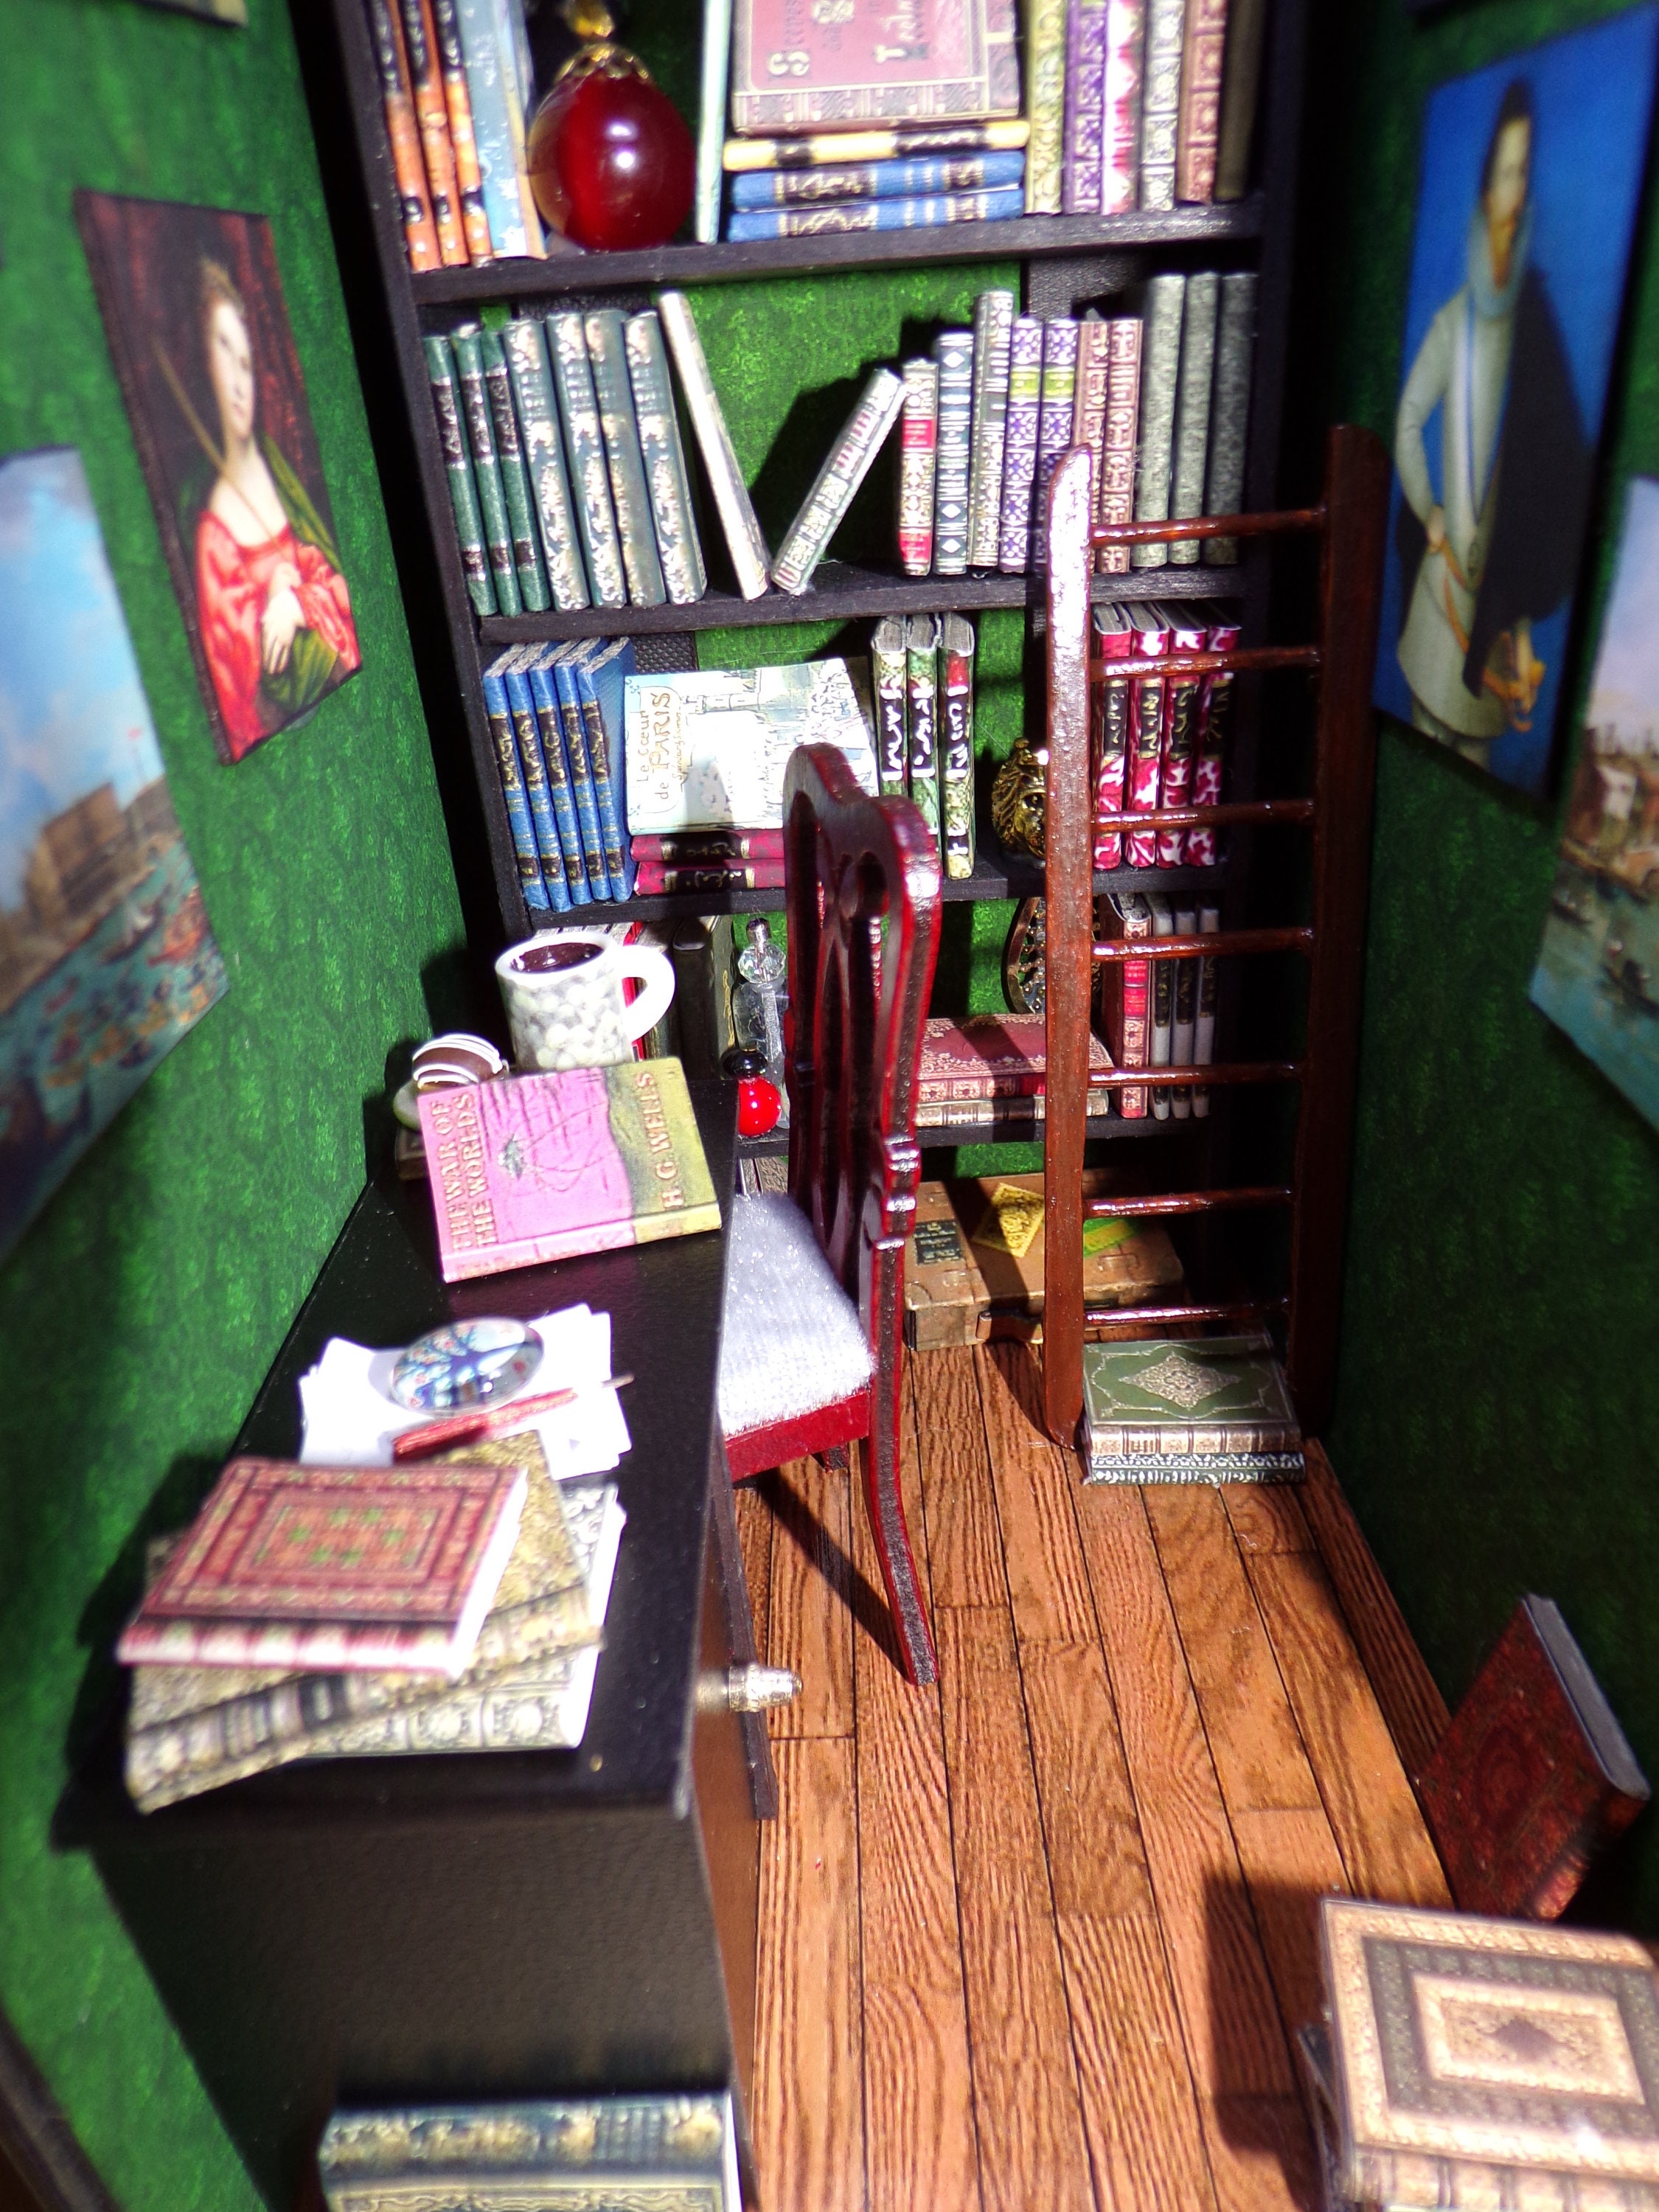 Booknook, Book Nook, Diorama, Miniature Room, Book Lover Gift, Vintage  Style Library, Office, Study, Desk and Chair, Heaps of Books. 